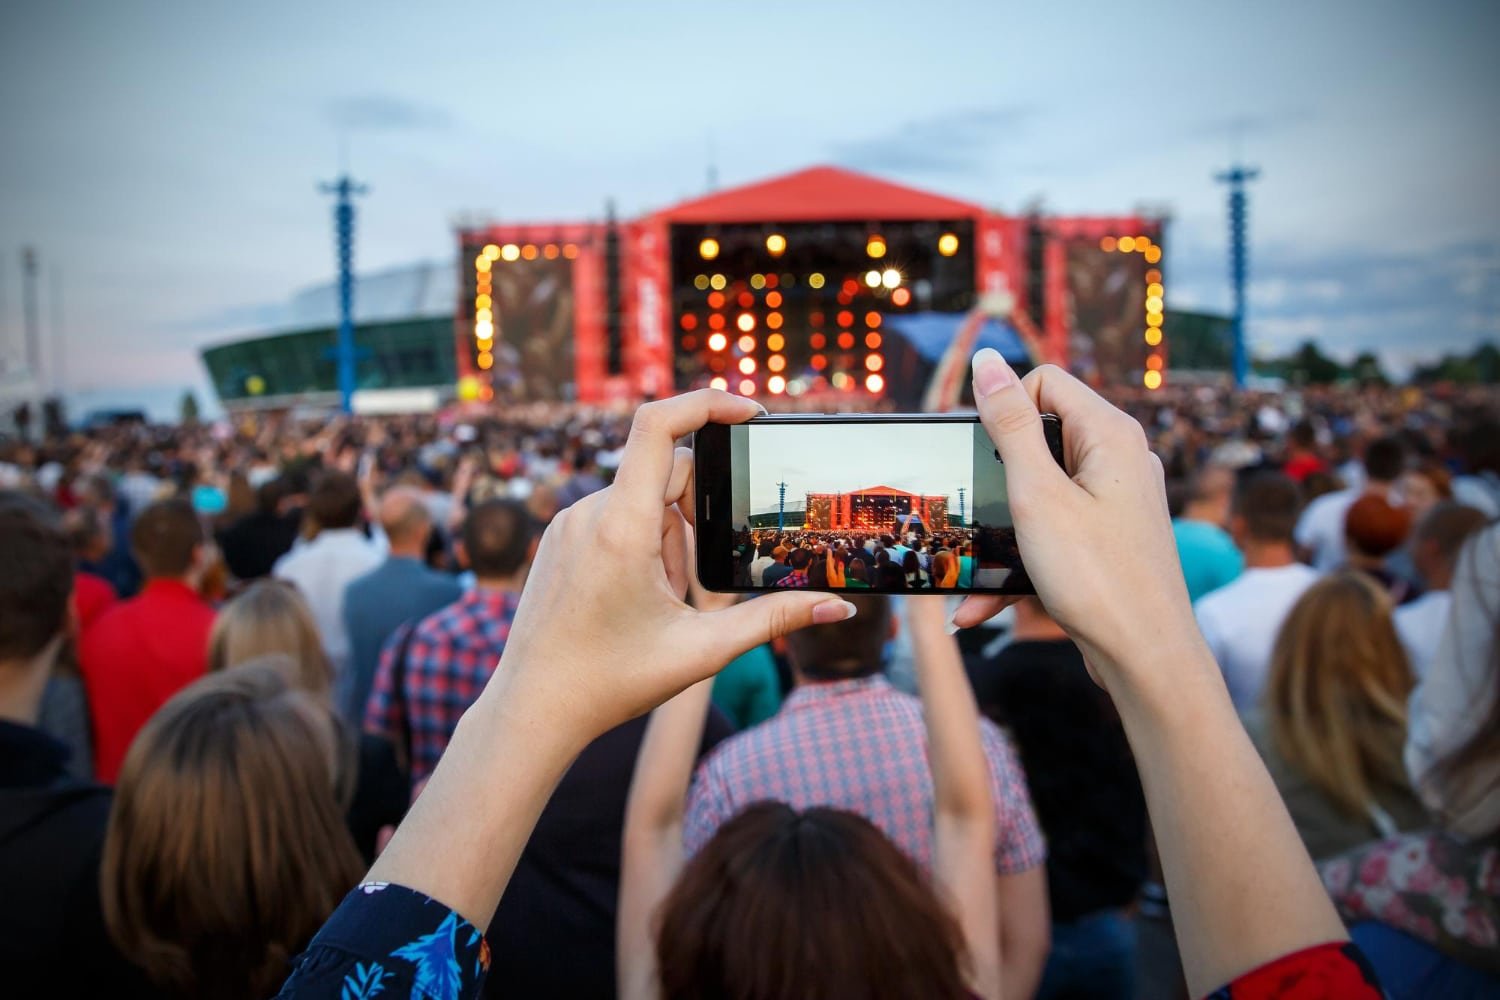 Experience Live Entertainment With Ticketmaster Finland’s Event Tickets